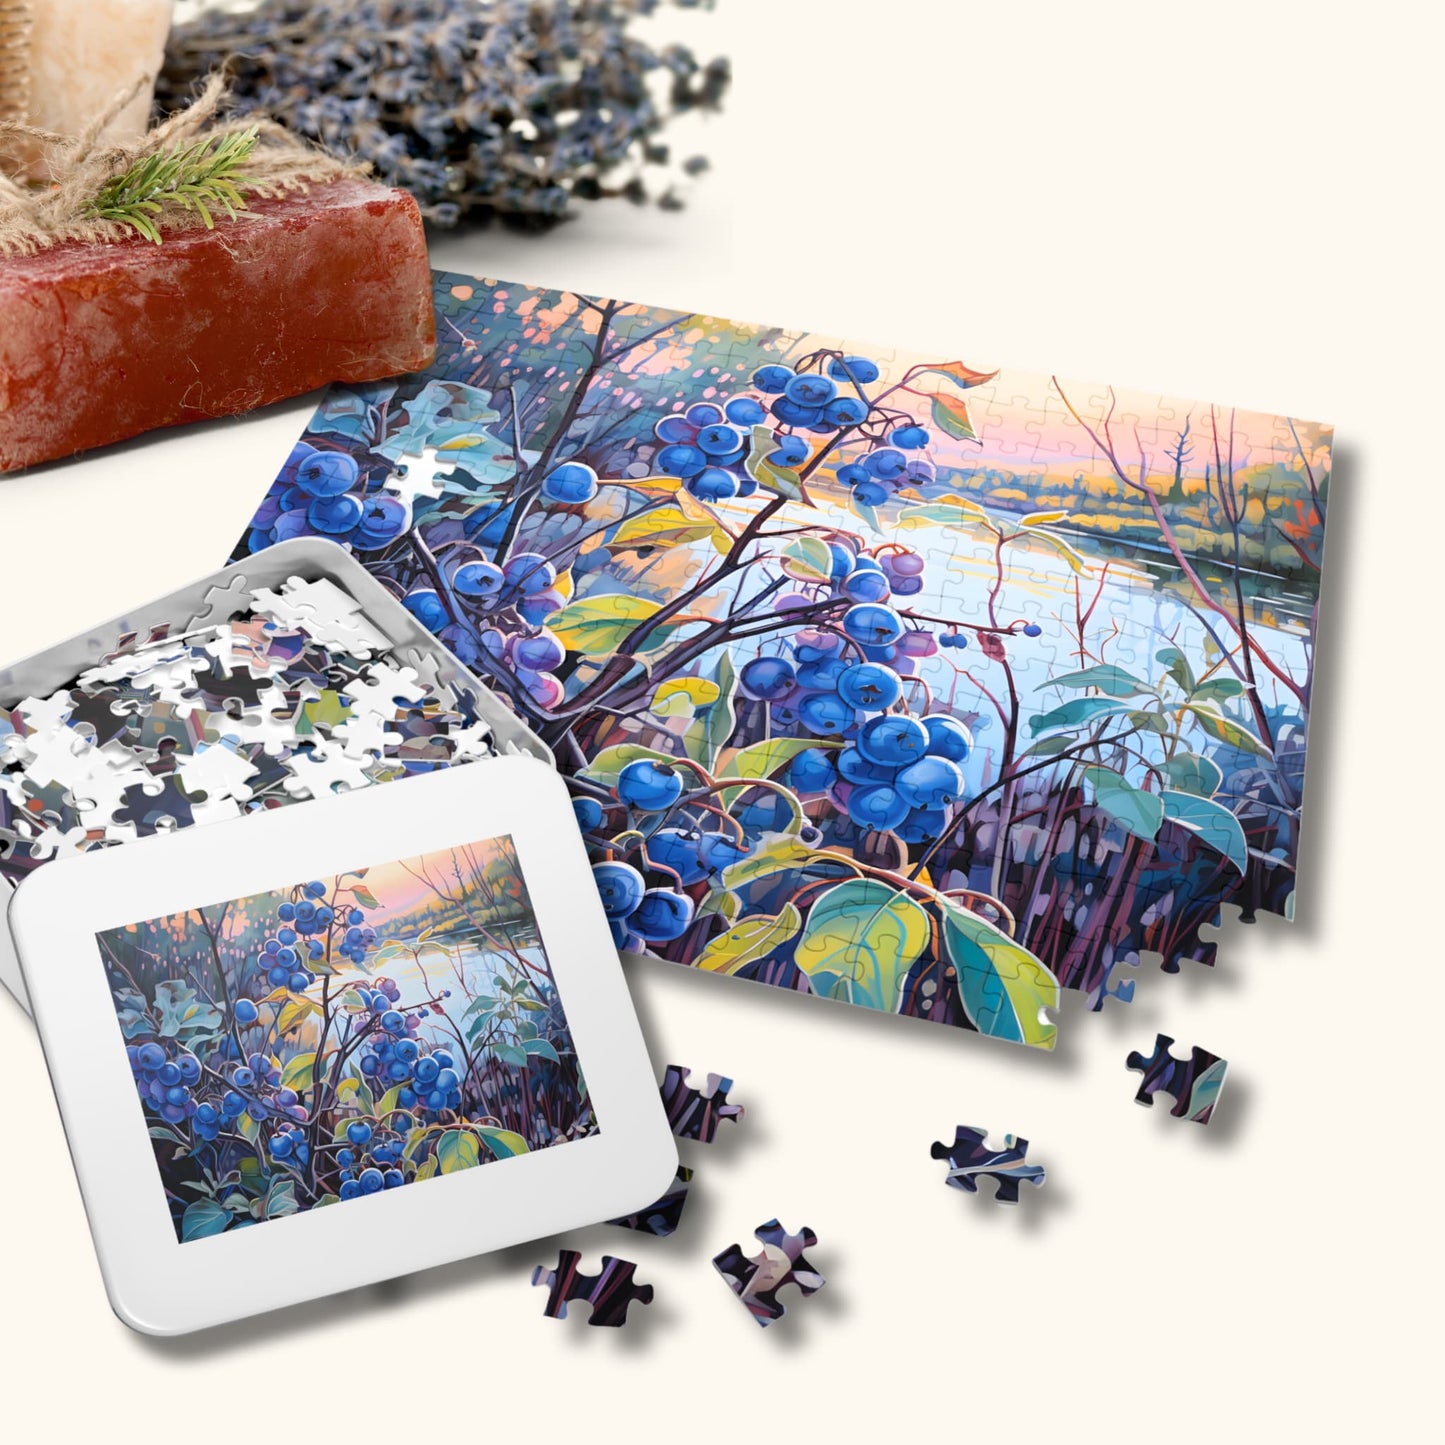 Impressionist Blueberry Bush puzzle and tin box arranged with decorative flowers